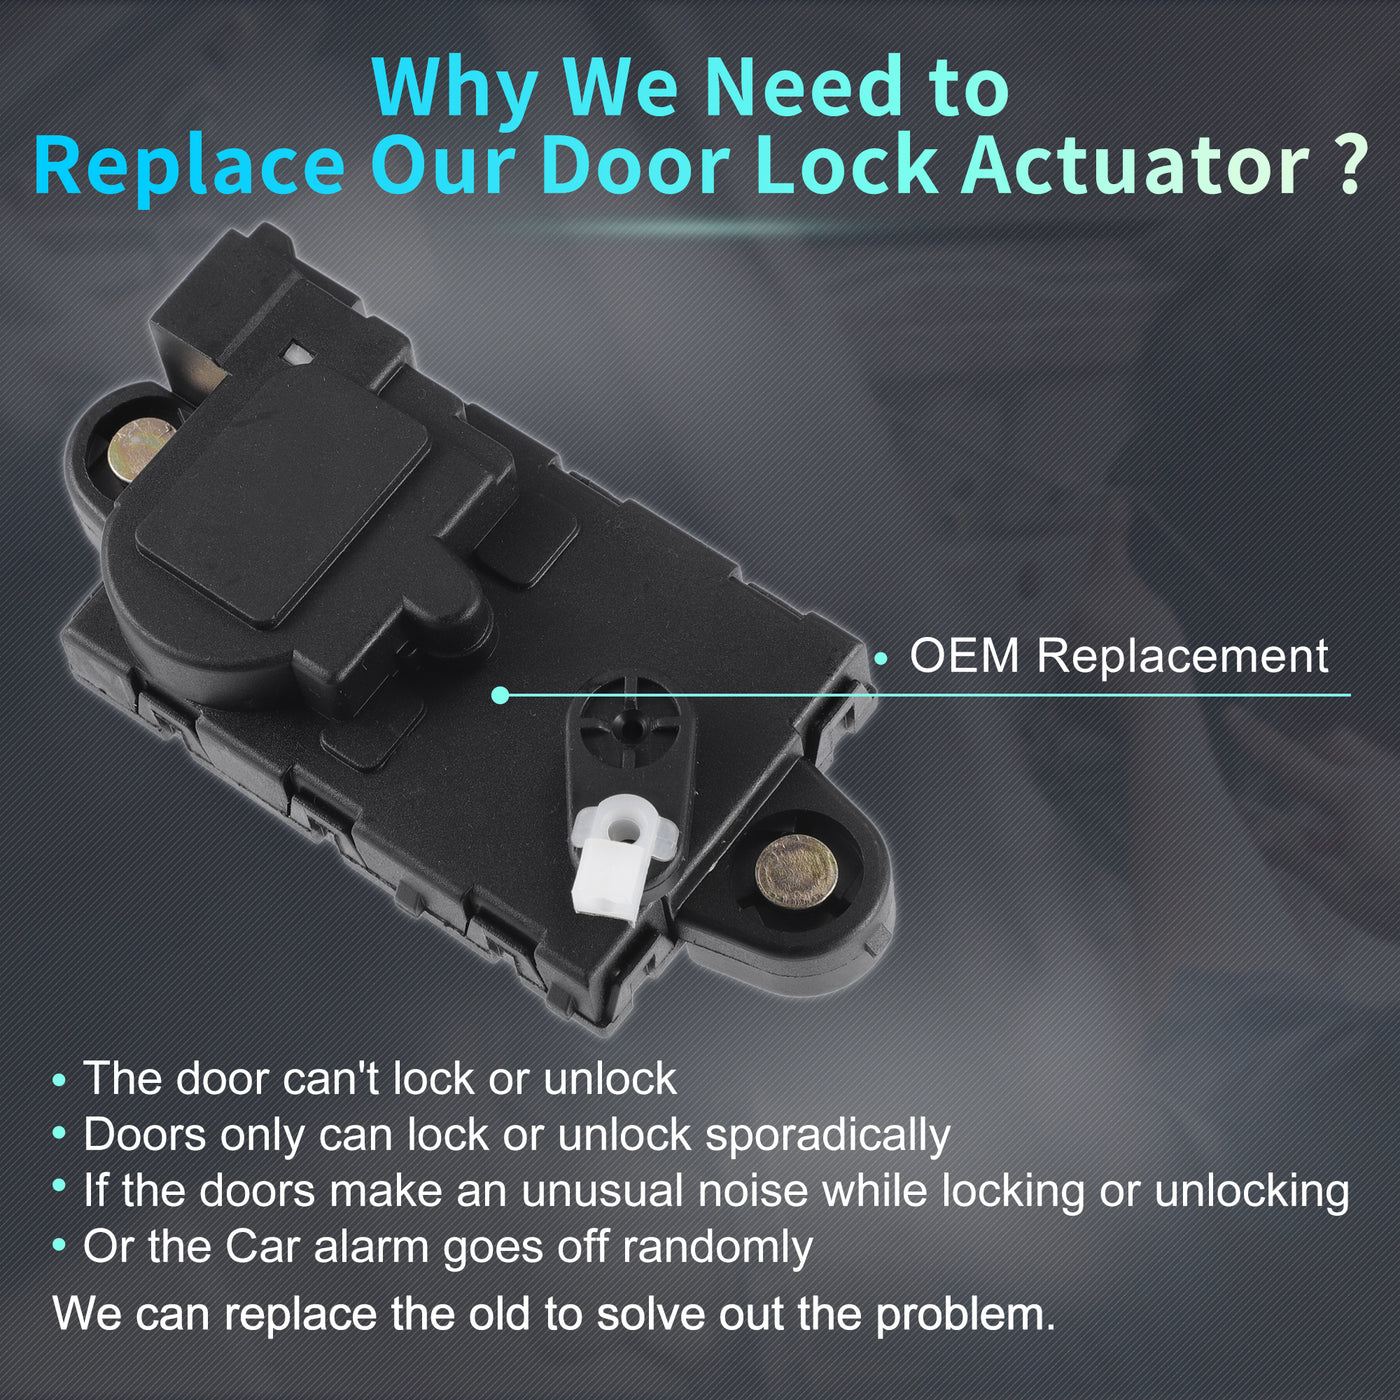 X AUTOHAUX Replacement Front Left Driver Side Power Door Lock Actuator Motor for Hyundai Sonata 1999-2005 2.4L for Hyundai XG350 2002-2005 Door Latch Actuator Assembly No.9573538000 Black